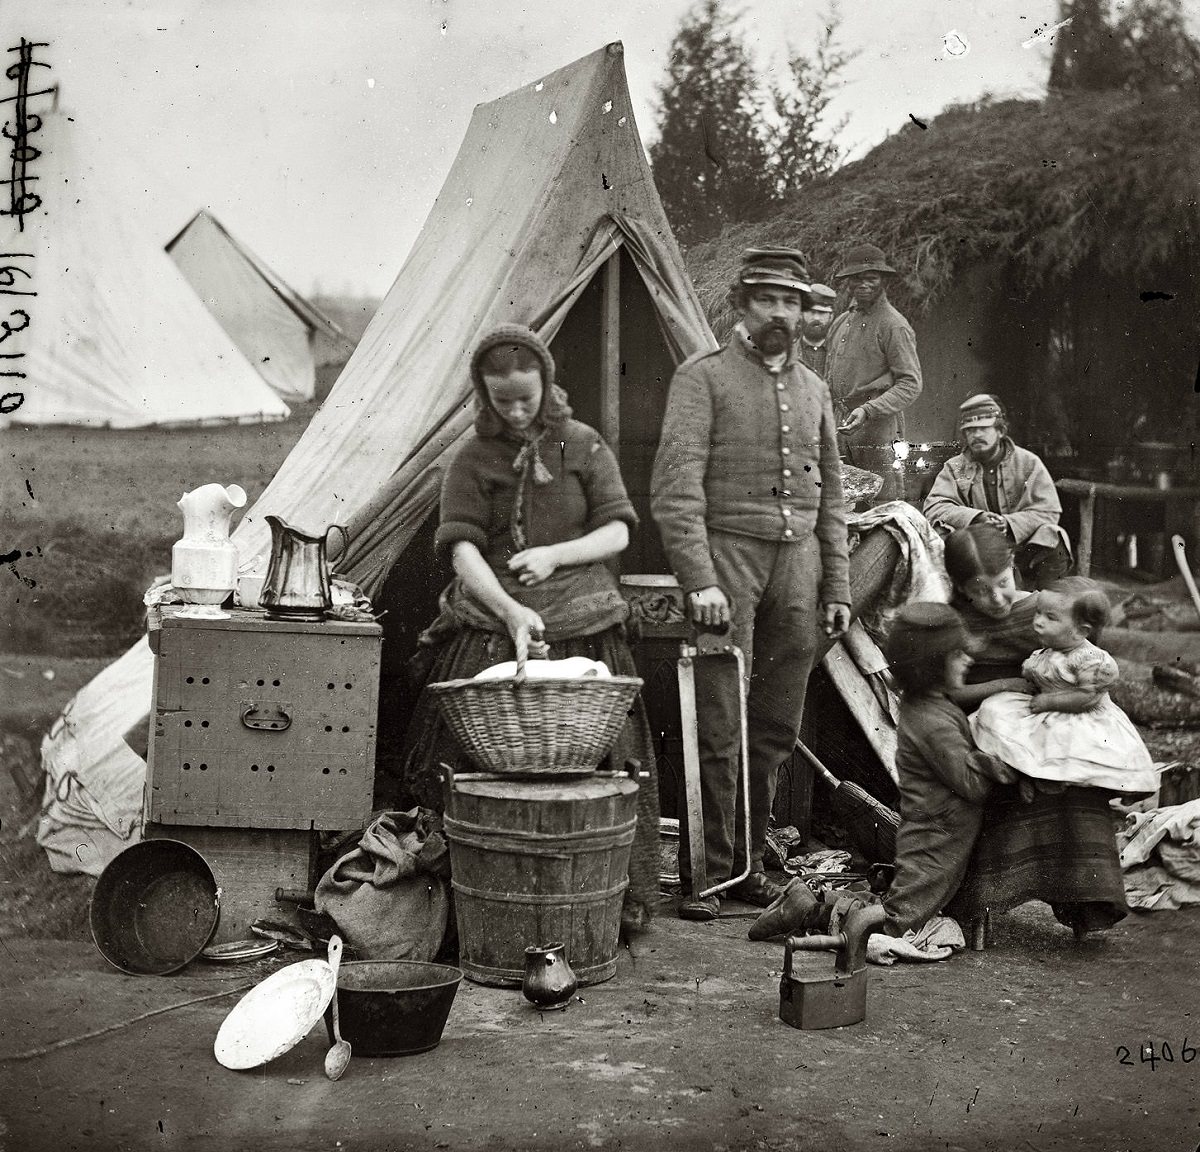 Washington, District of Columbia. Tent life of the 31st (later, 82nd) Pennsylvania Infantry at Queen's Farm, vicinity of Fort Slocum, 1861